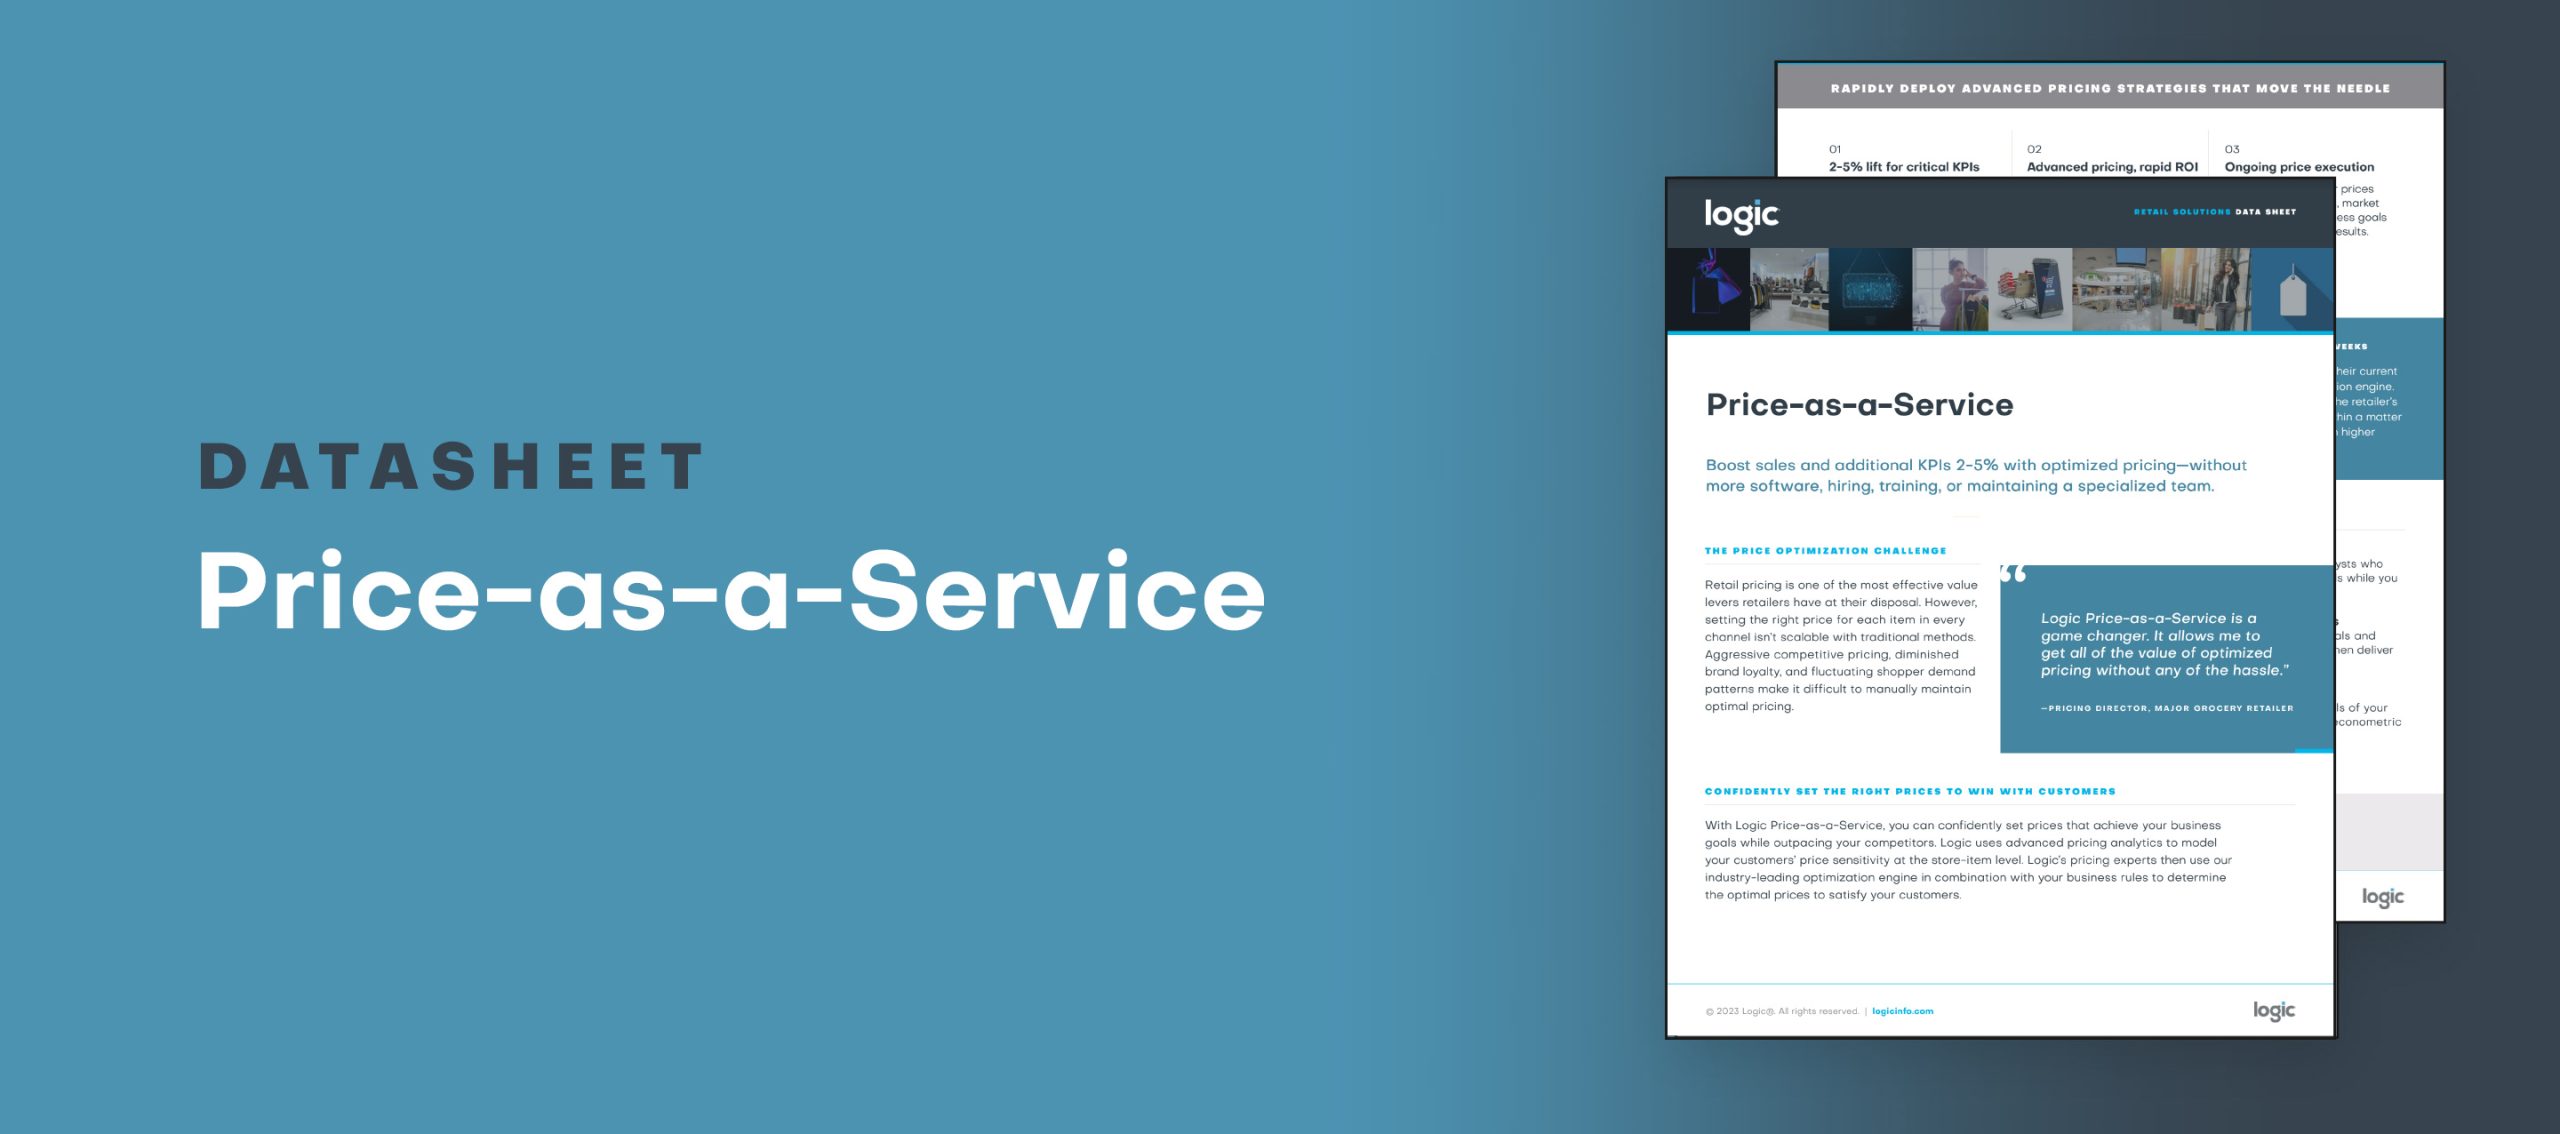 Price-as-a-Service